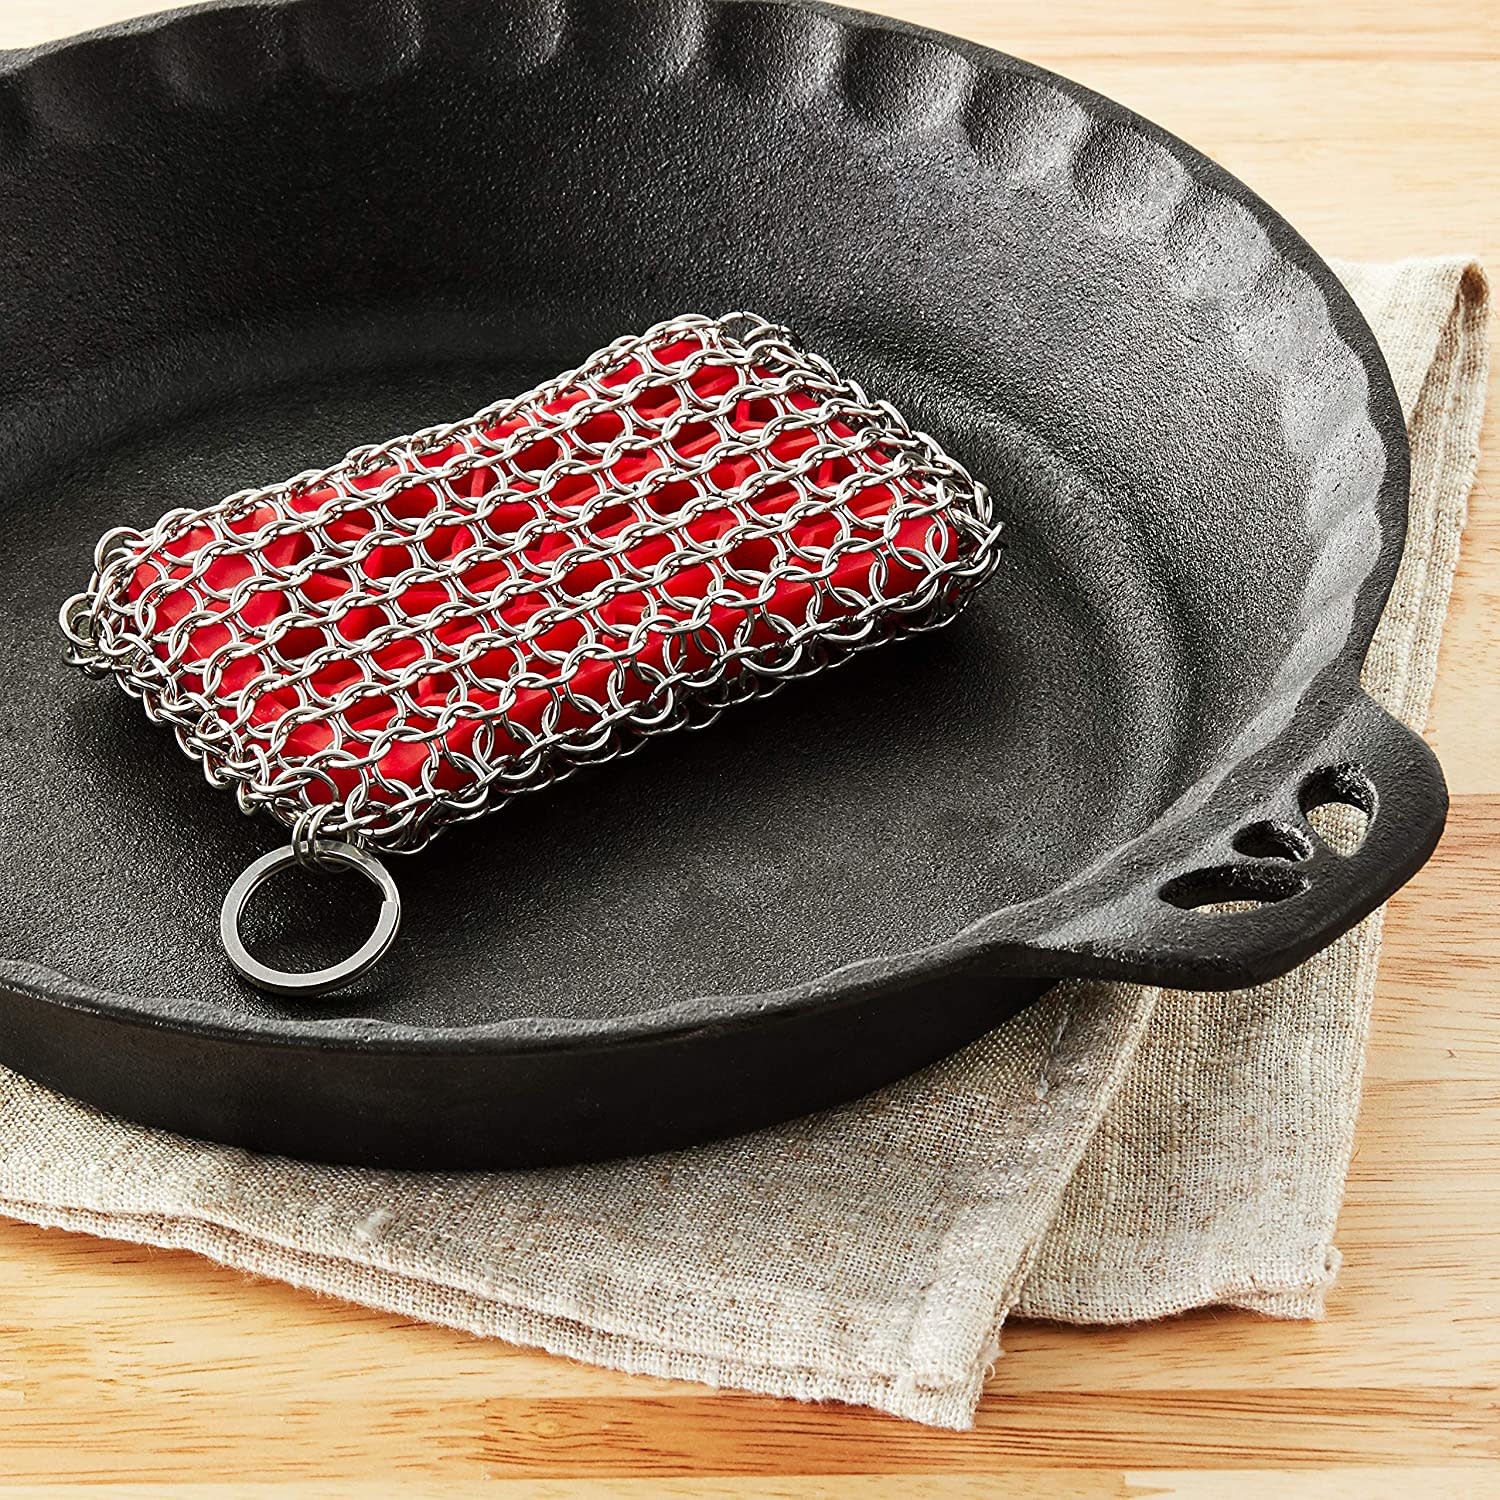 Cast Iron Cleaner Chainmail Scrubber with Pan Scraper, Ergonomic